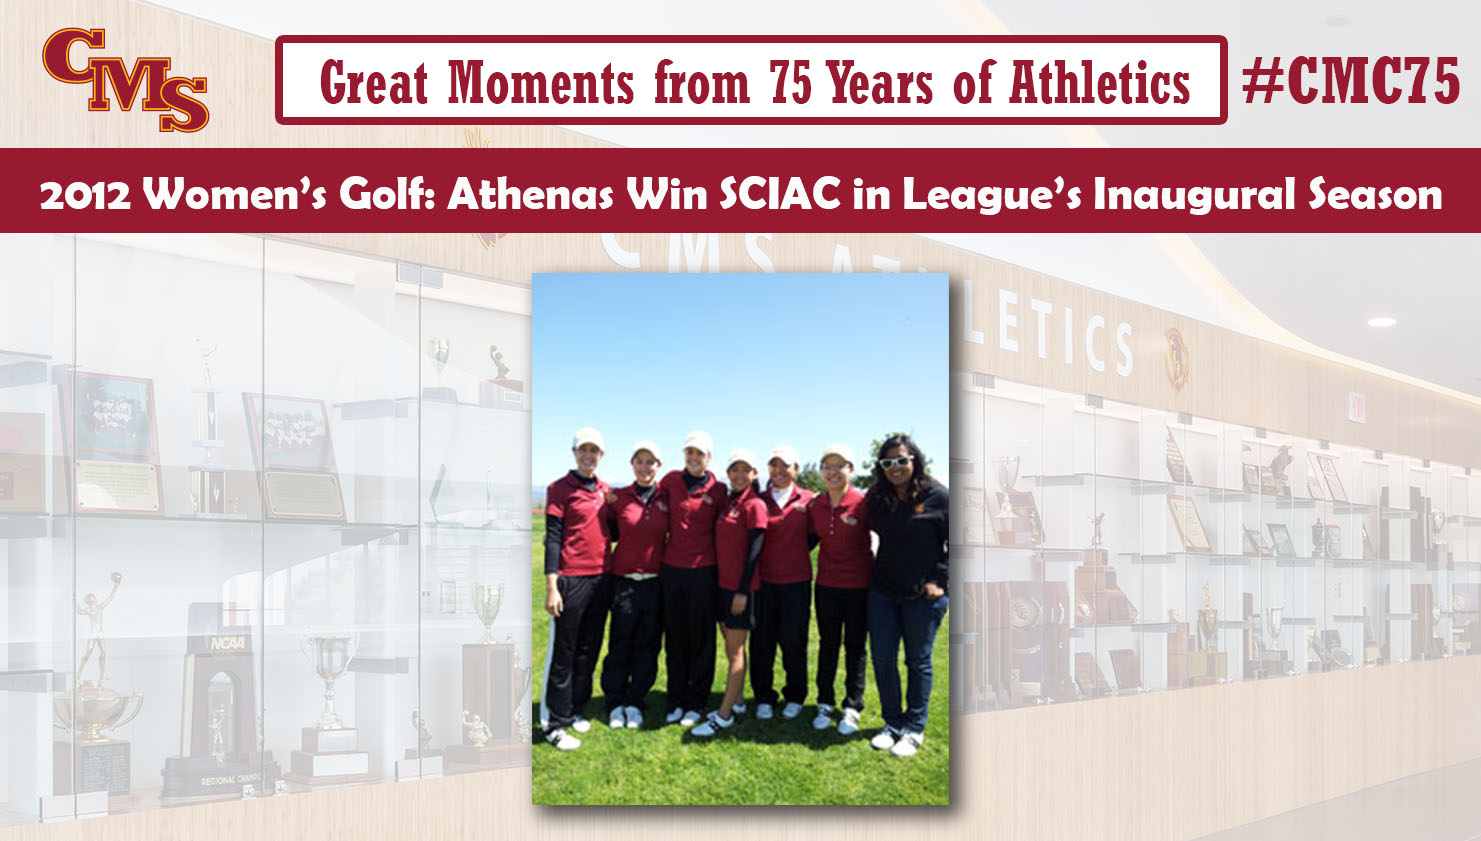 2012 women's golf team photo. Words over the photo read: Great Moments from 75 Years of Athletics. 2012 Women's Golf: Athenas Win SCIAC in League's Inaugural Season